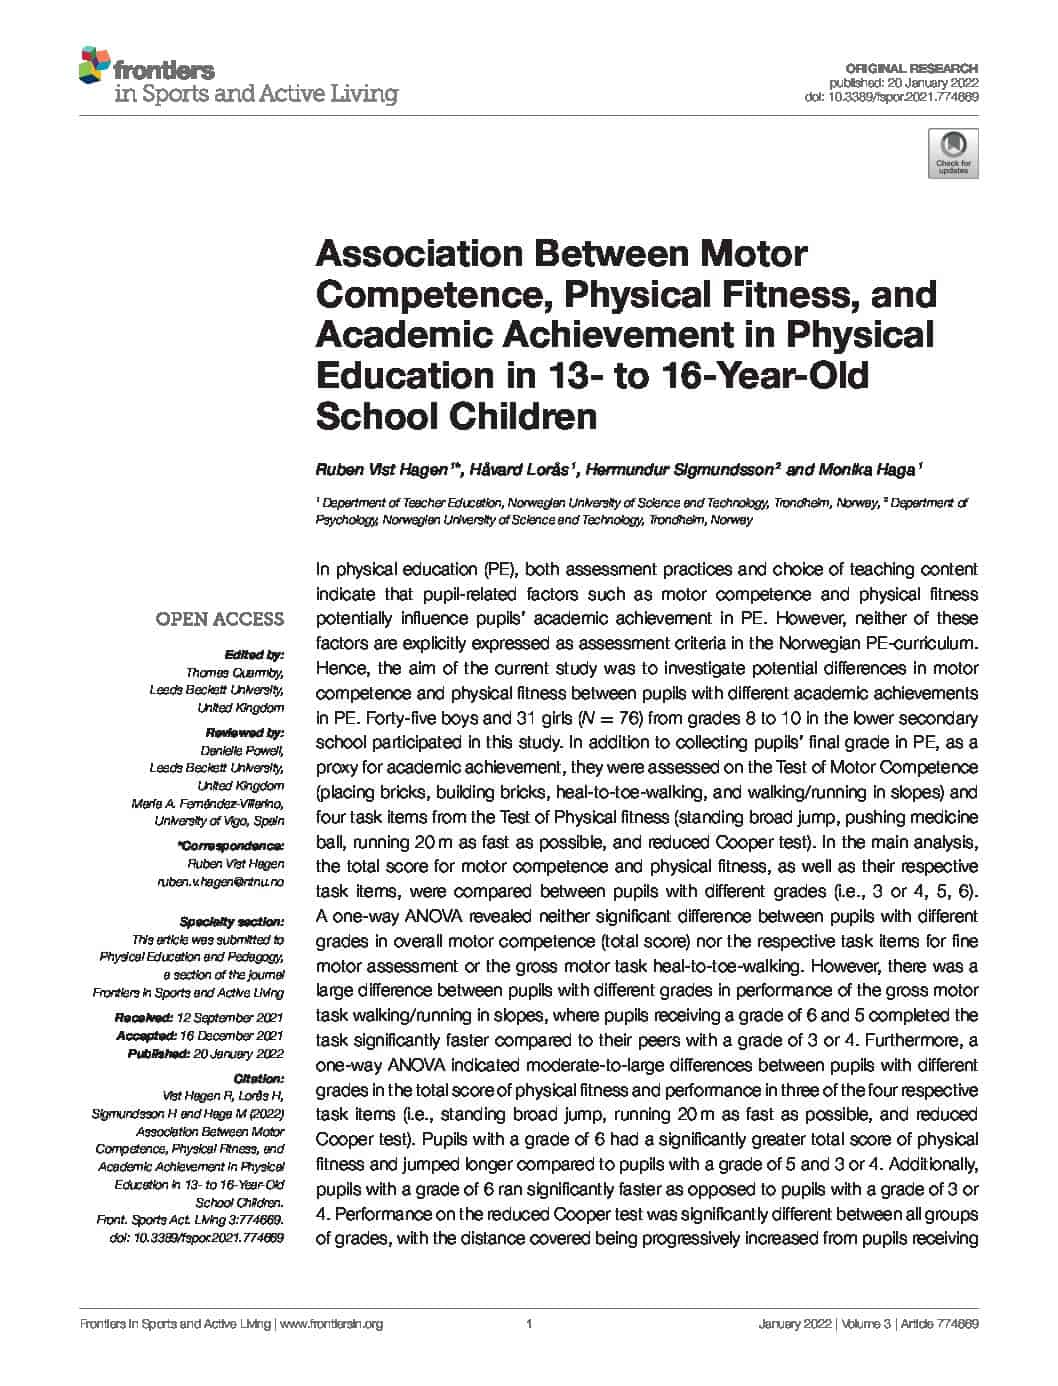 Featured image for “Association Between Motor Competence, Physical Fitness, and Academic Achievement in Physical Education in 13- to 16-Year-Old School Children”